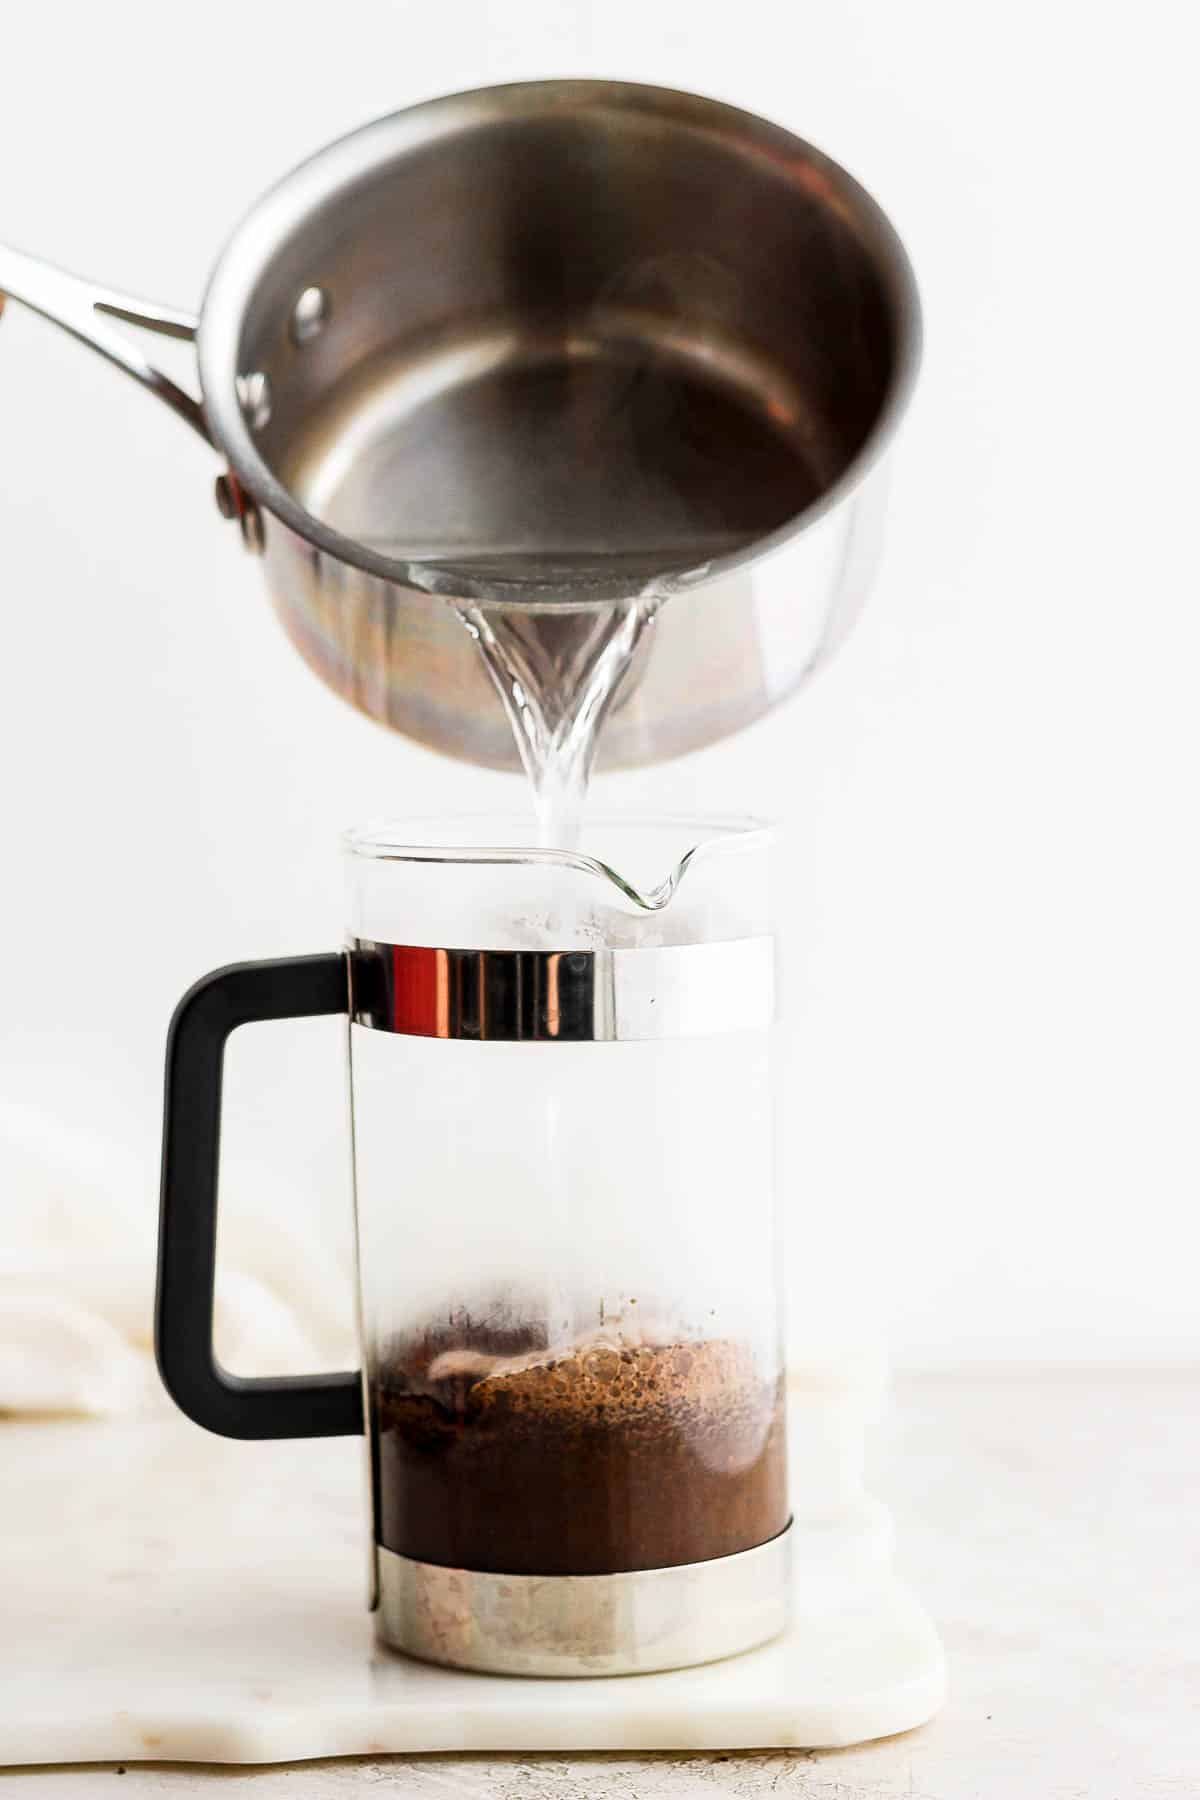 Someone pouring hot water into a french press.